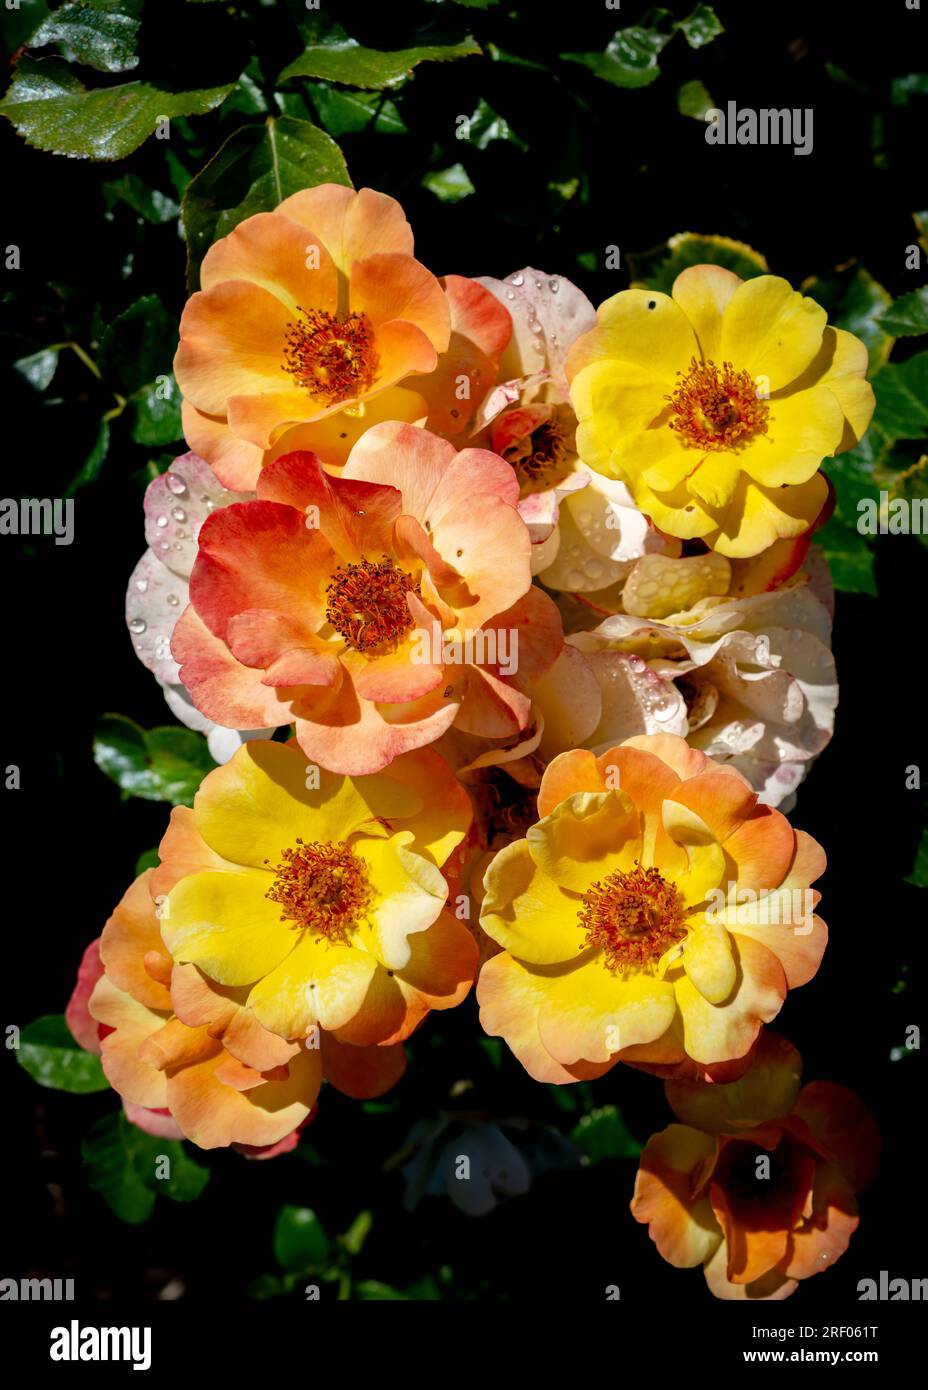 Beautiful roses yellowish in color in full bloom Stock Photo